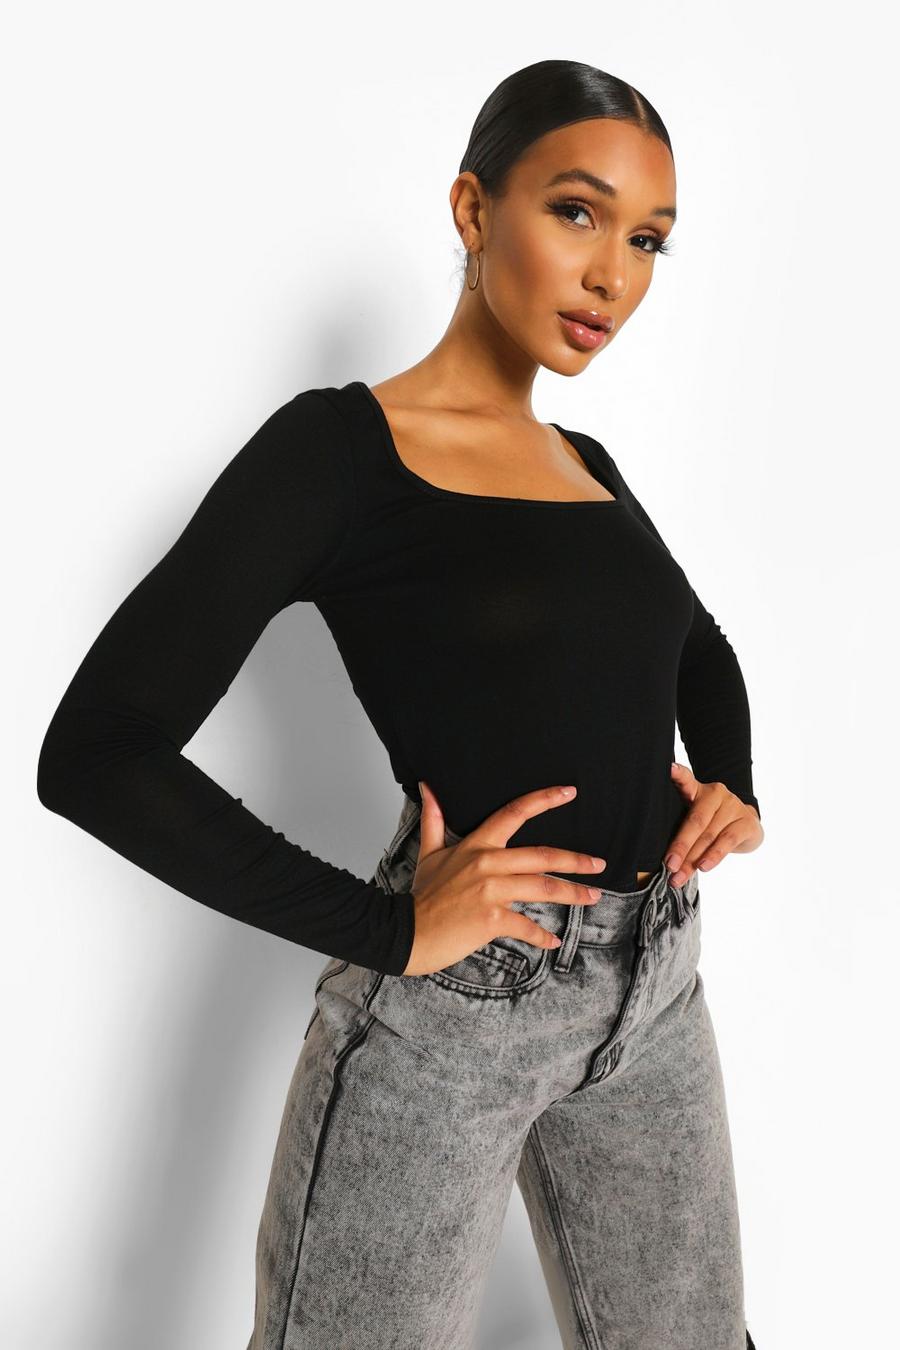  Square Neck Long Sleeve Top Long Sleeve Athletic Tops